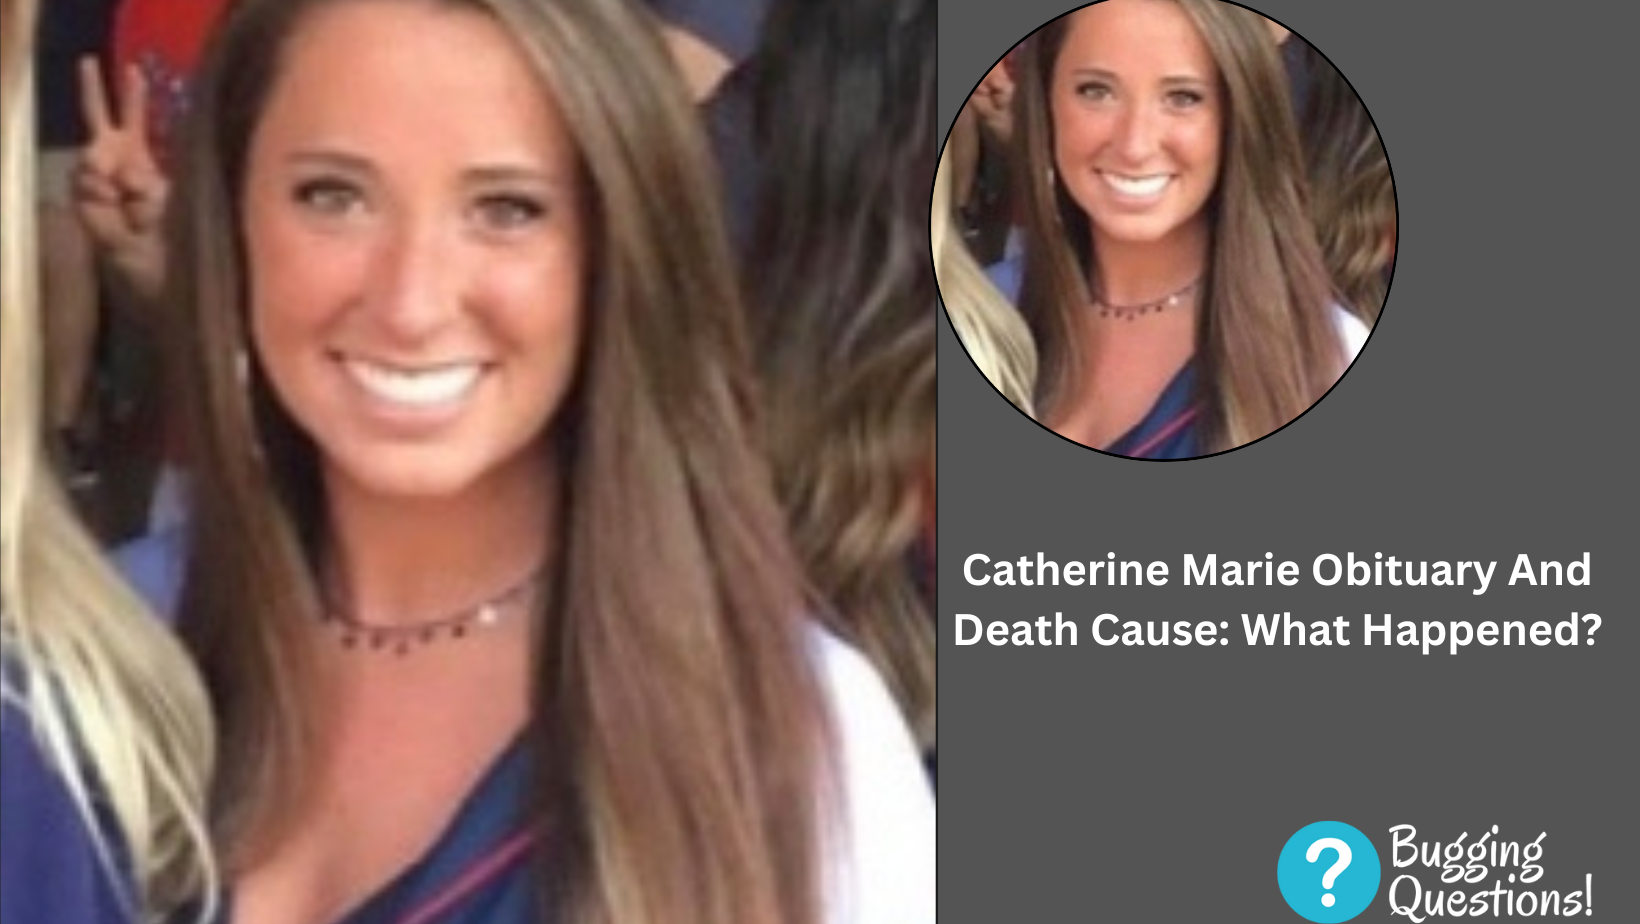 Catherine Marie Obituary And Death Cause